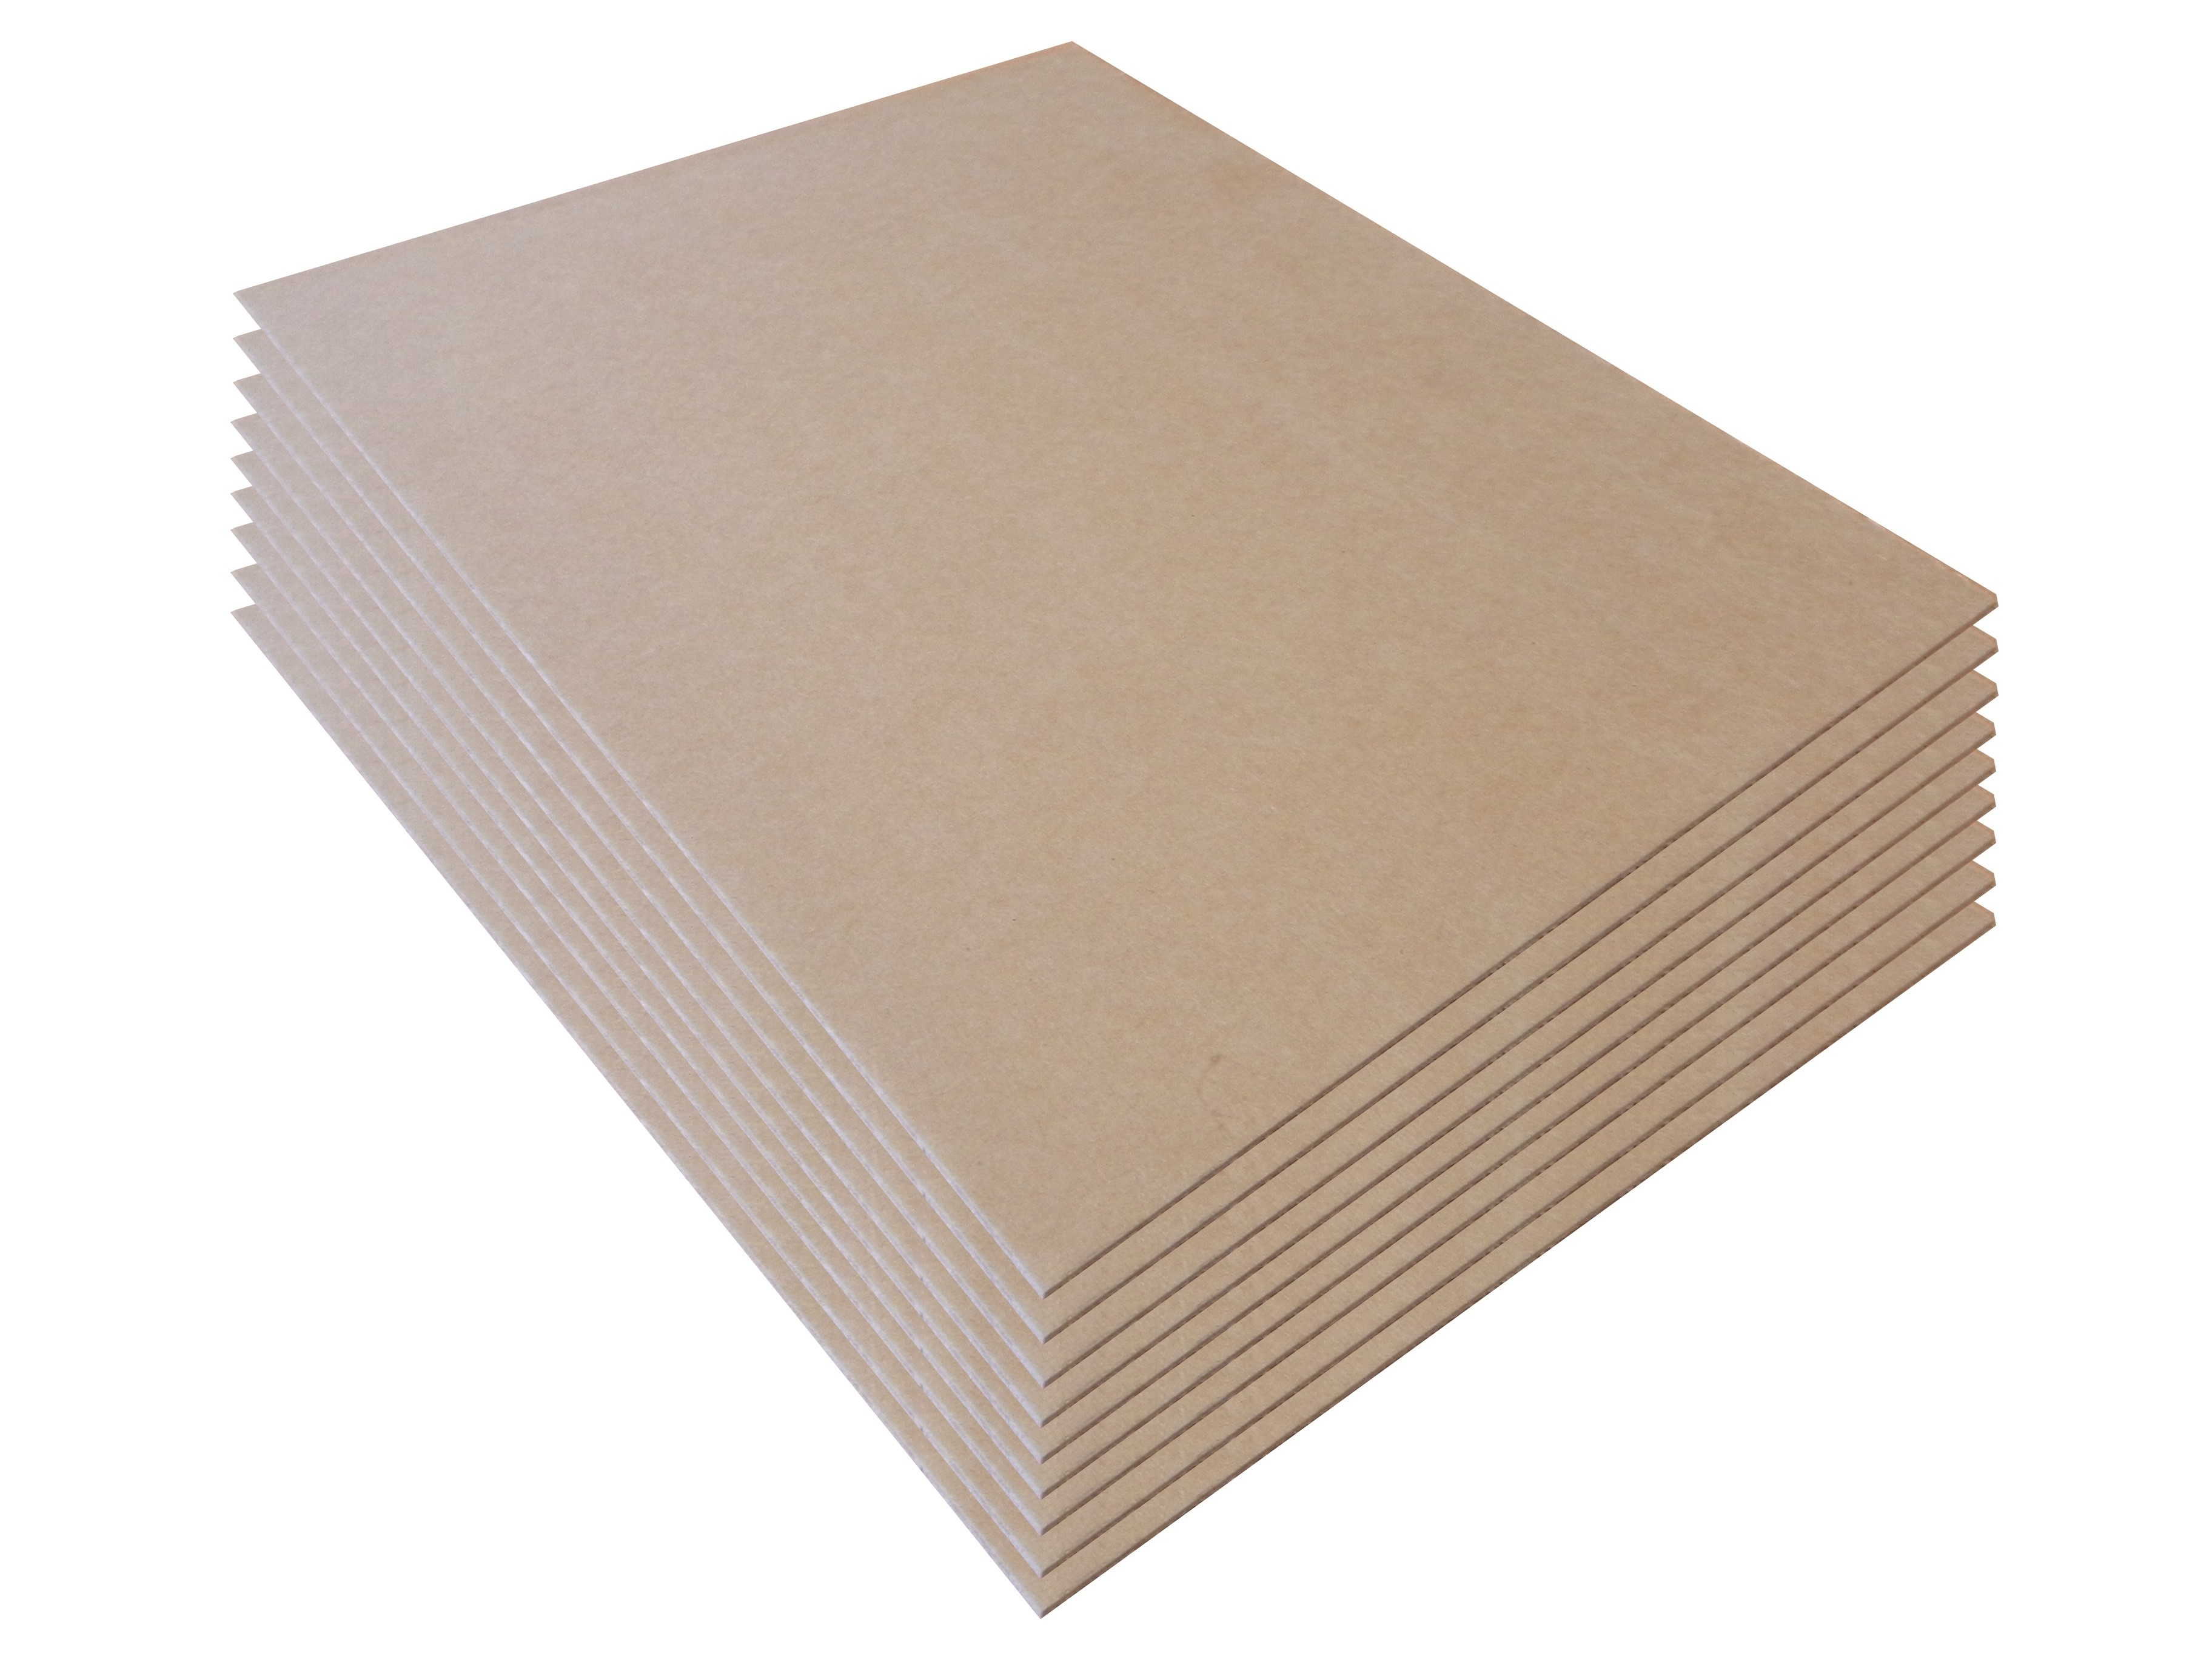 Backing Board 700 x 500mm - 10 pack